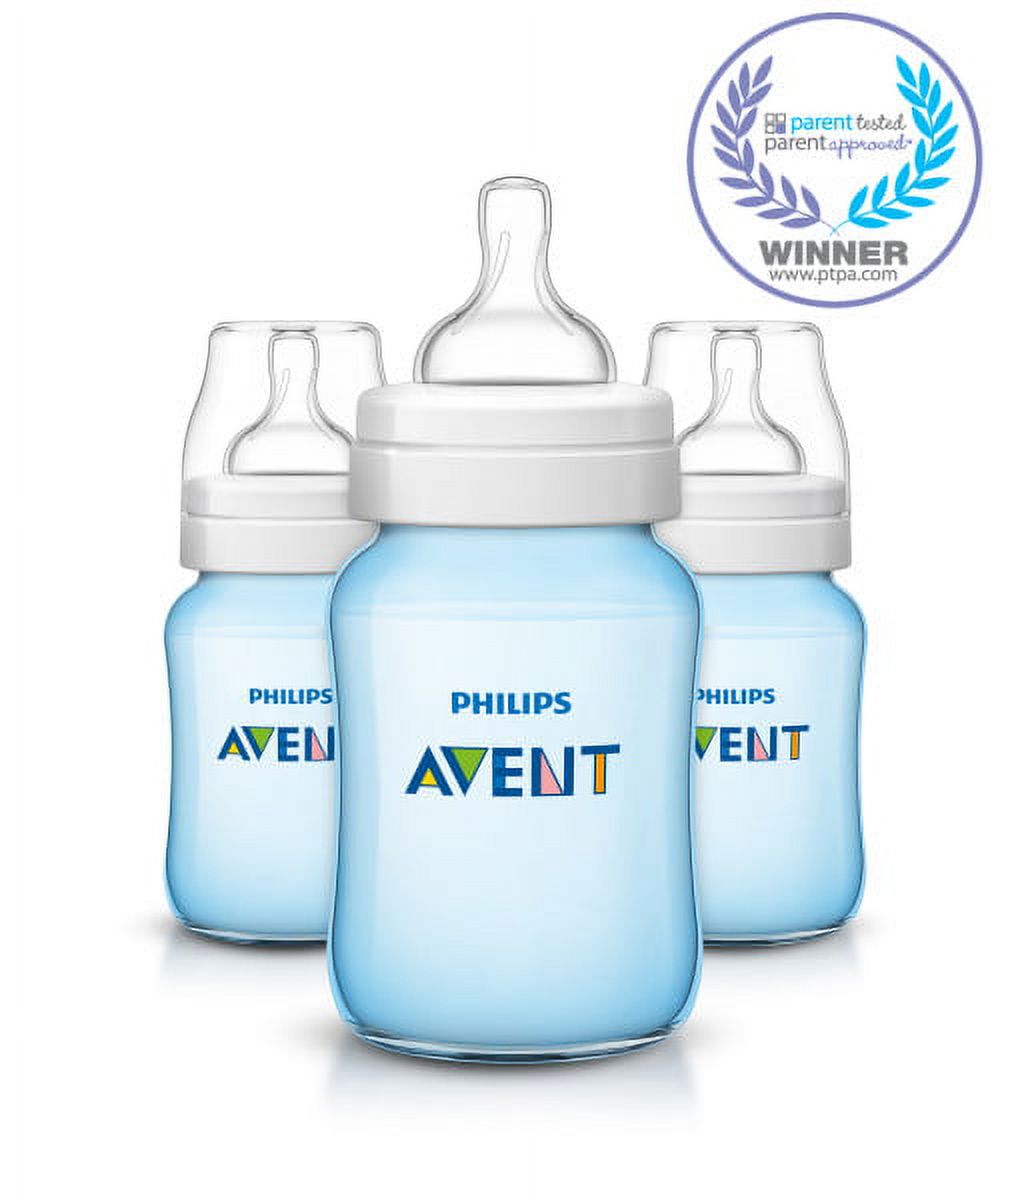 Avent 3-Pack Wide-Neck Anti-Colic Bottles (9 oz.) - blue, one size - image 3 of 14